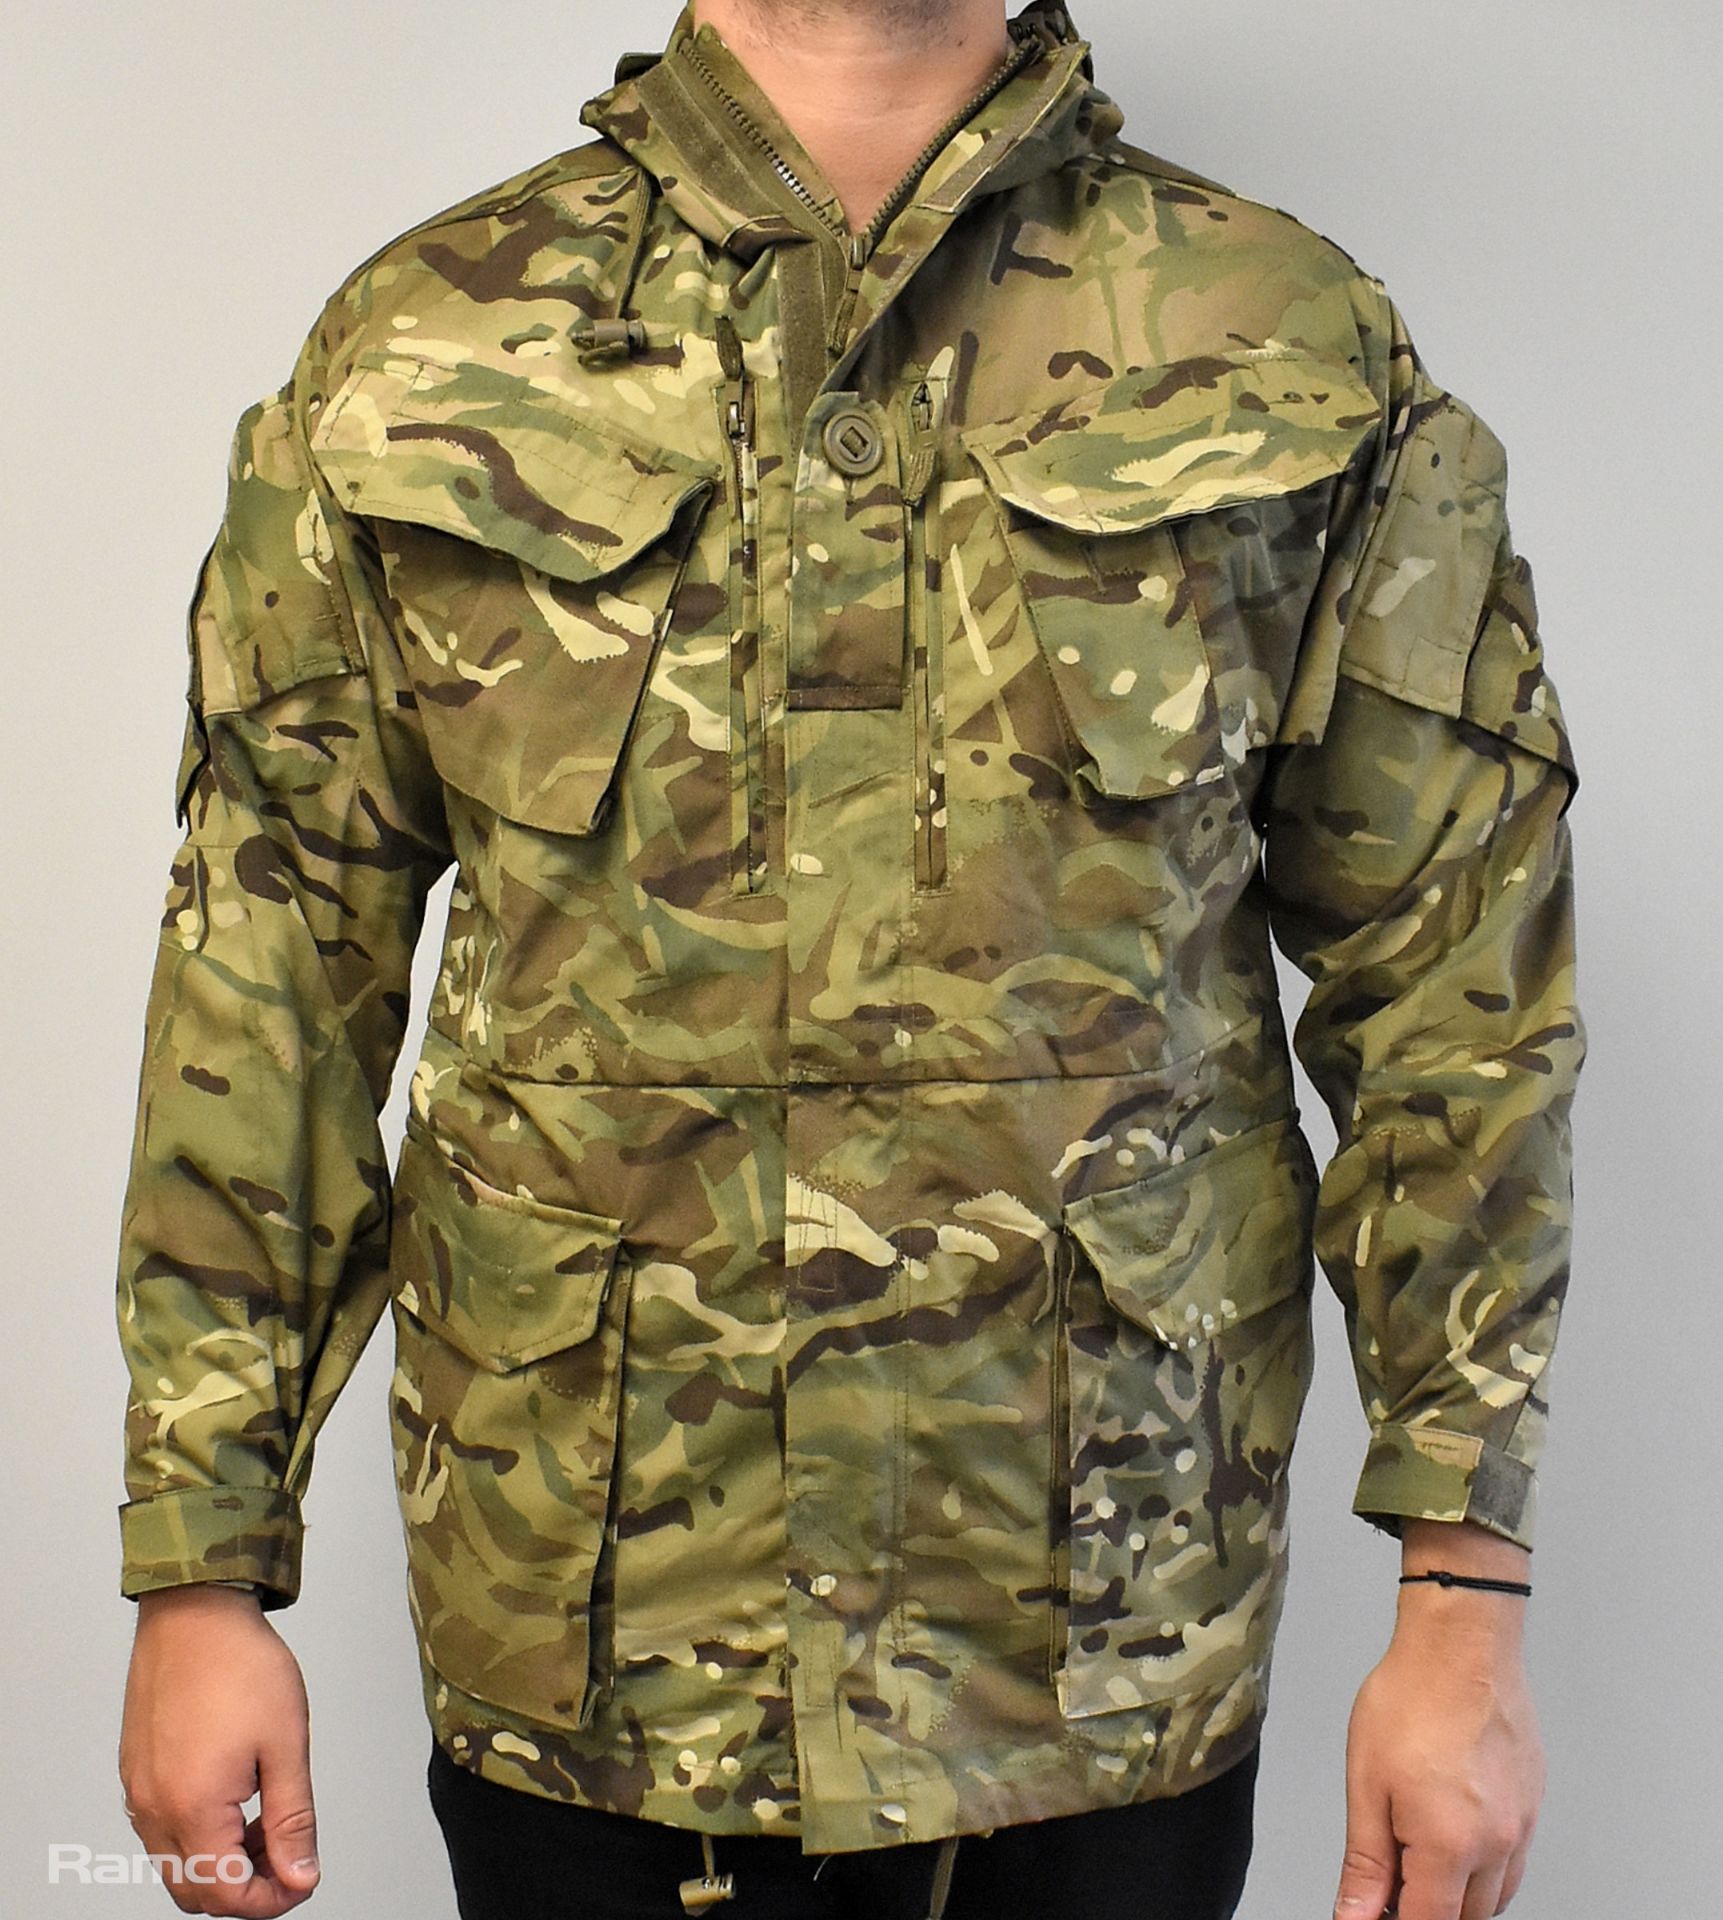 50x British Army MTP combat smocks 2 windproof - mixed grades and sizes